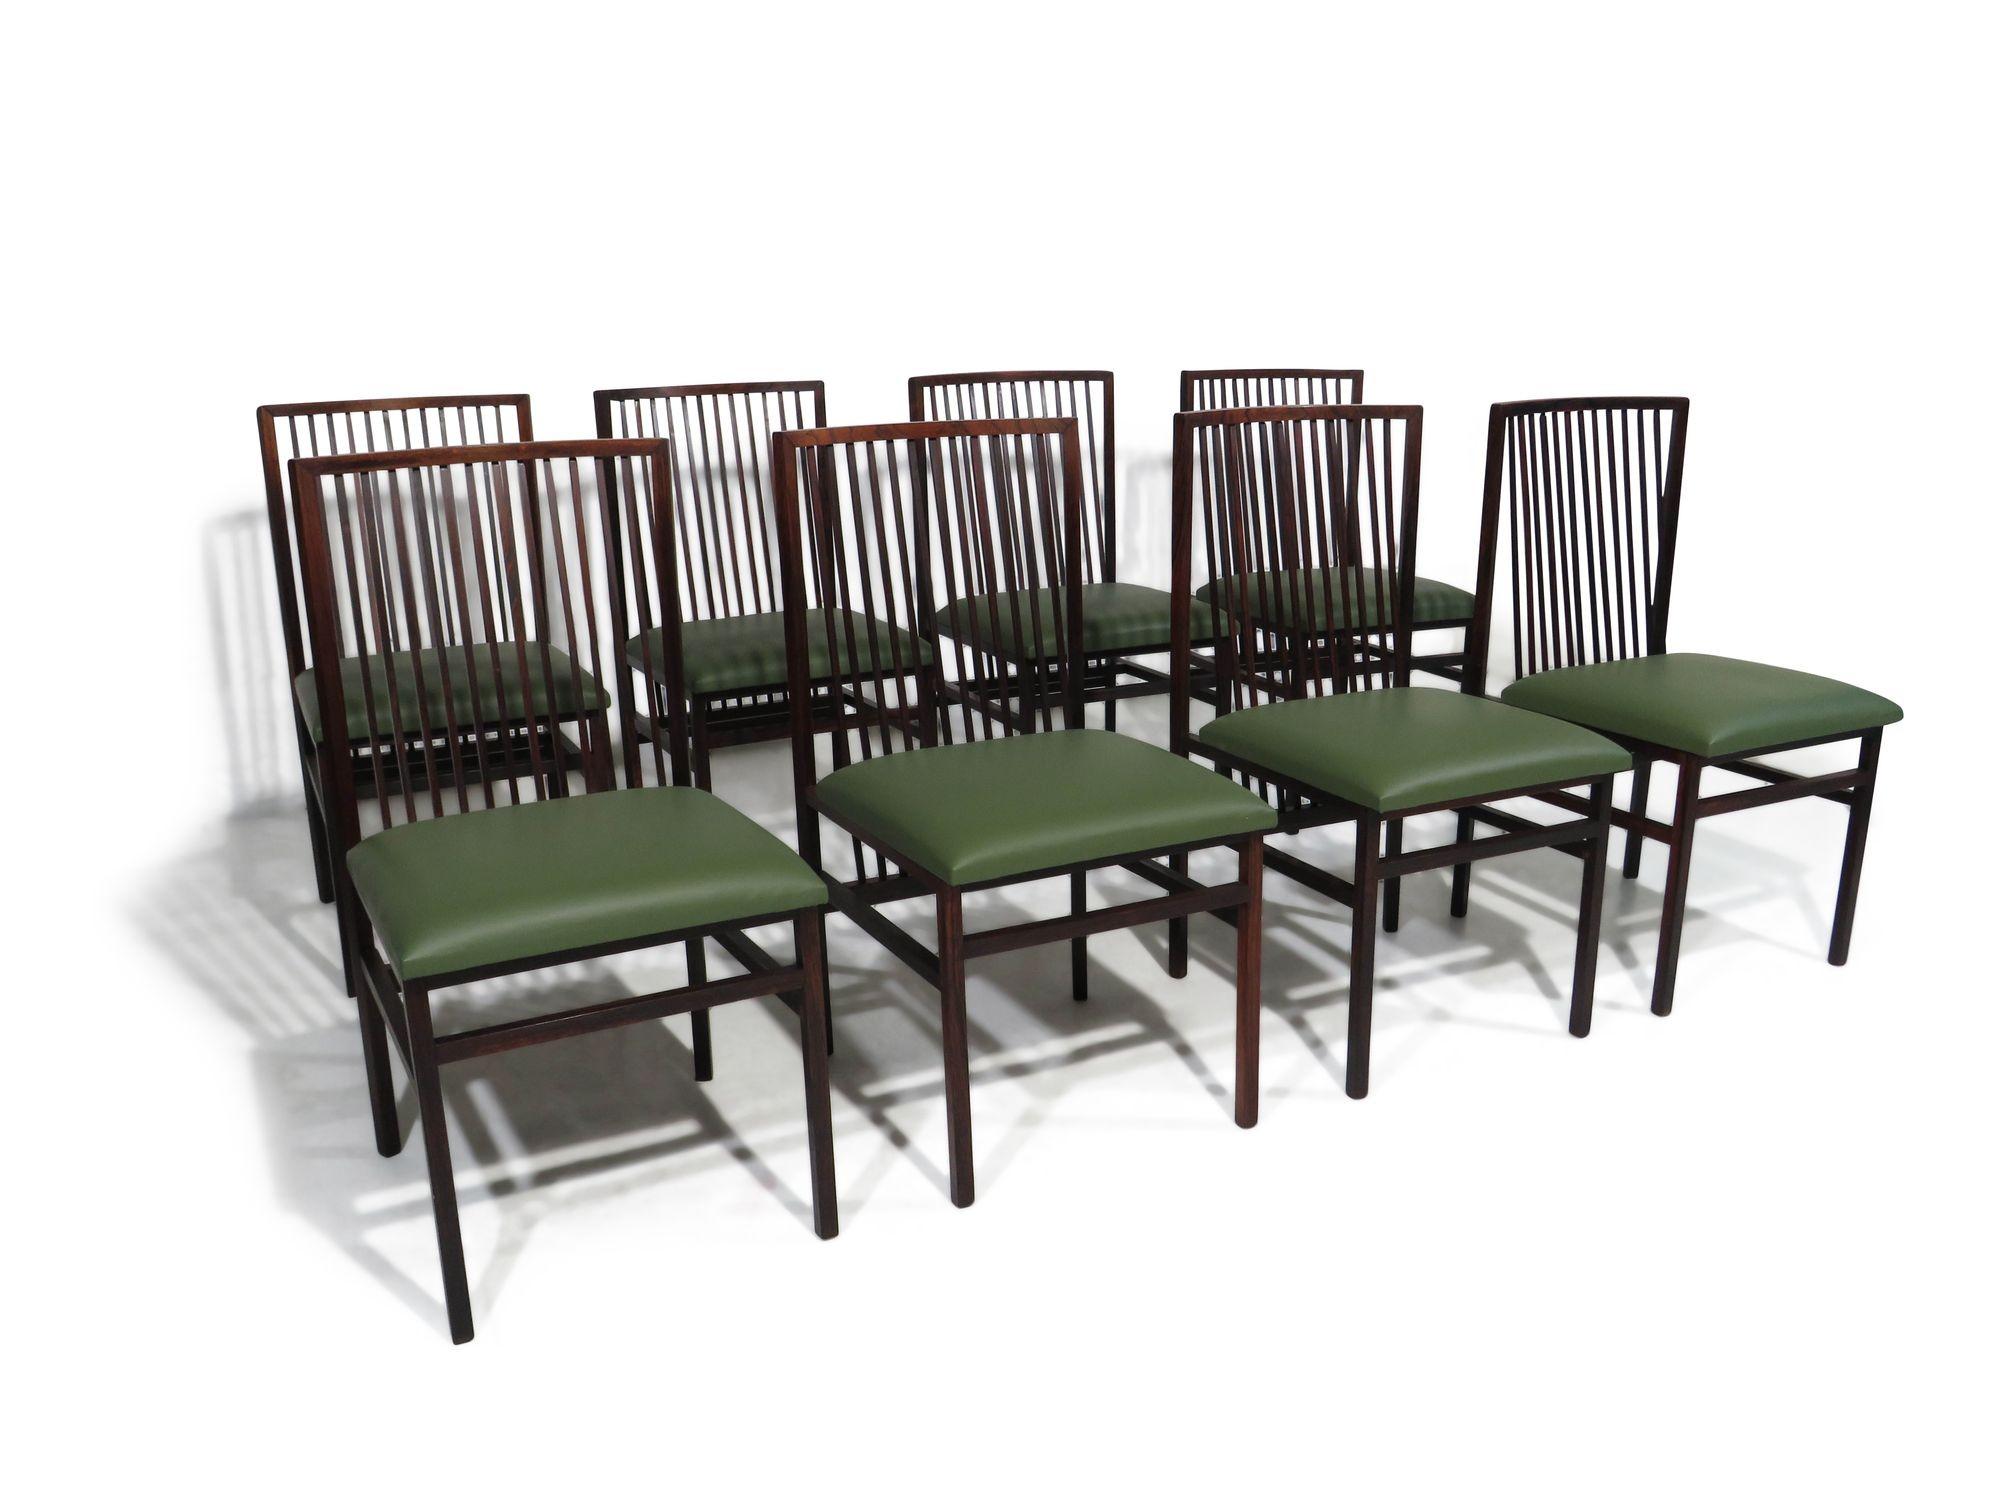 Set of eight dining chairs in the manner of Joaquim Tenreiro (1906-1992), Brazil, circa 1947. Handcrafted from solid jacaranda rosewood, these chairs feature architectural quadrangular rods, a curved back with mitered corners, and precisely joined